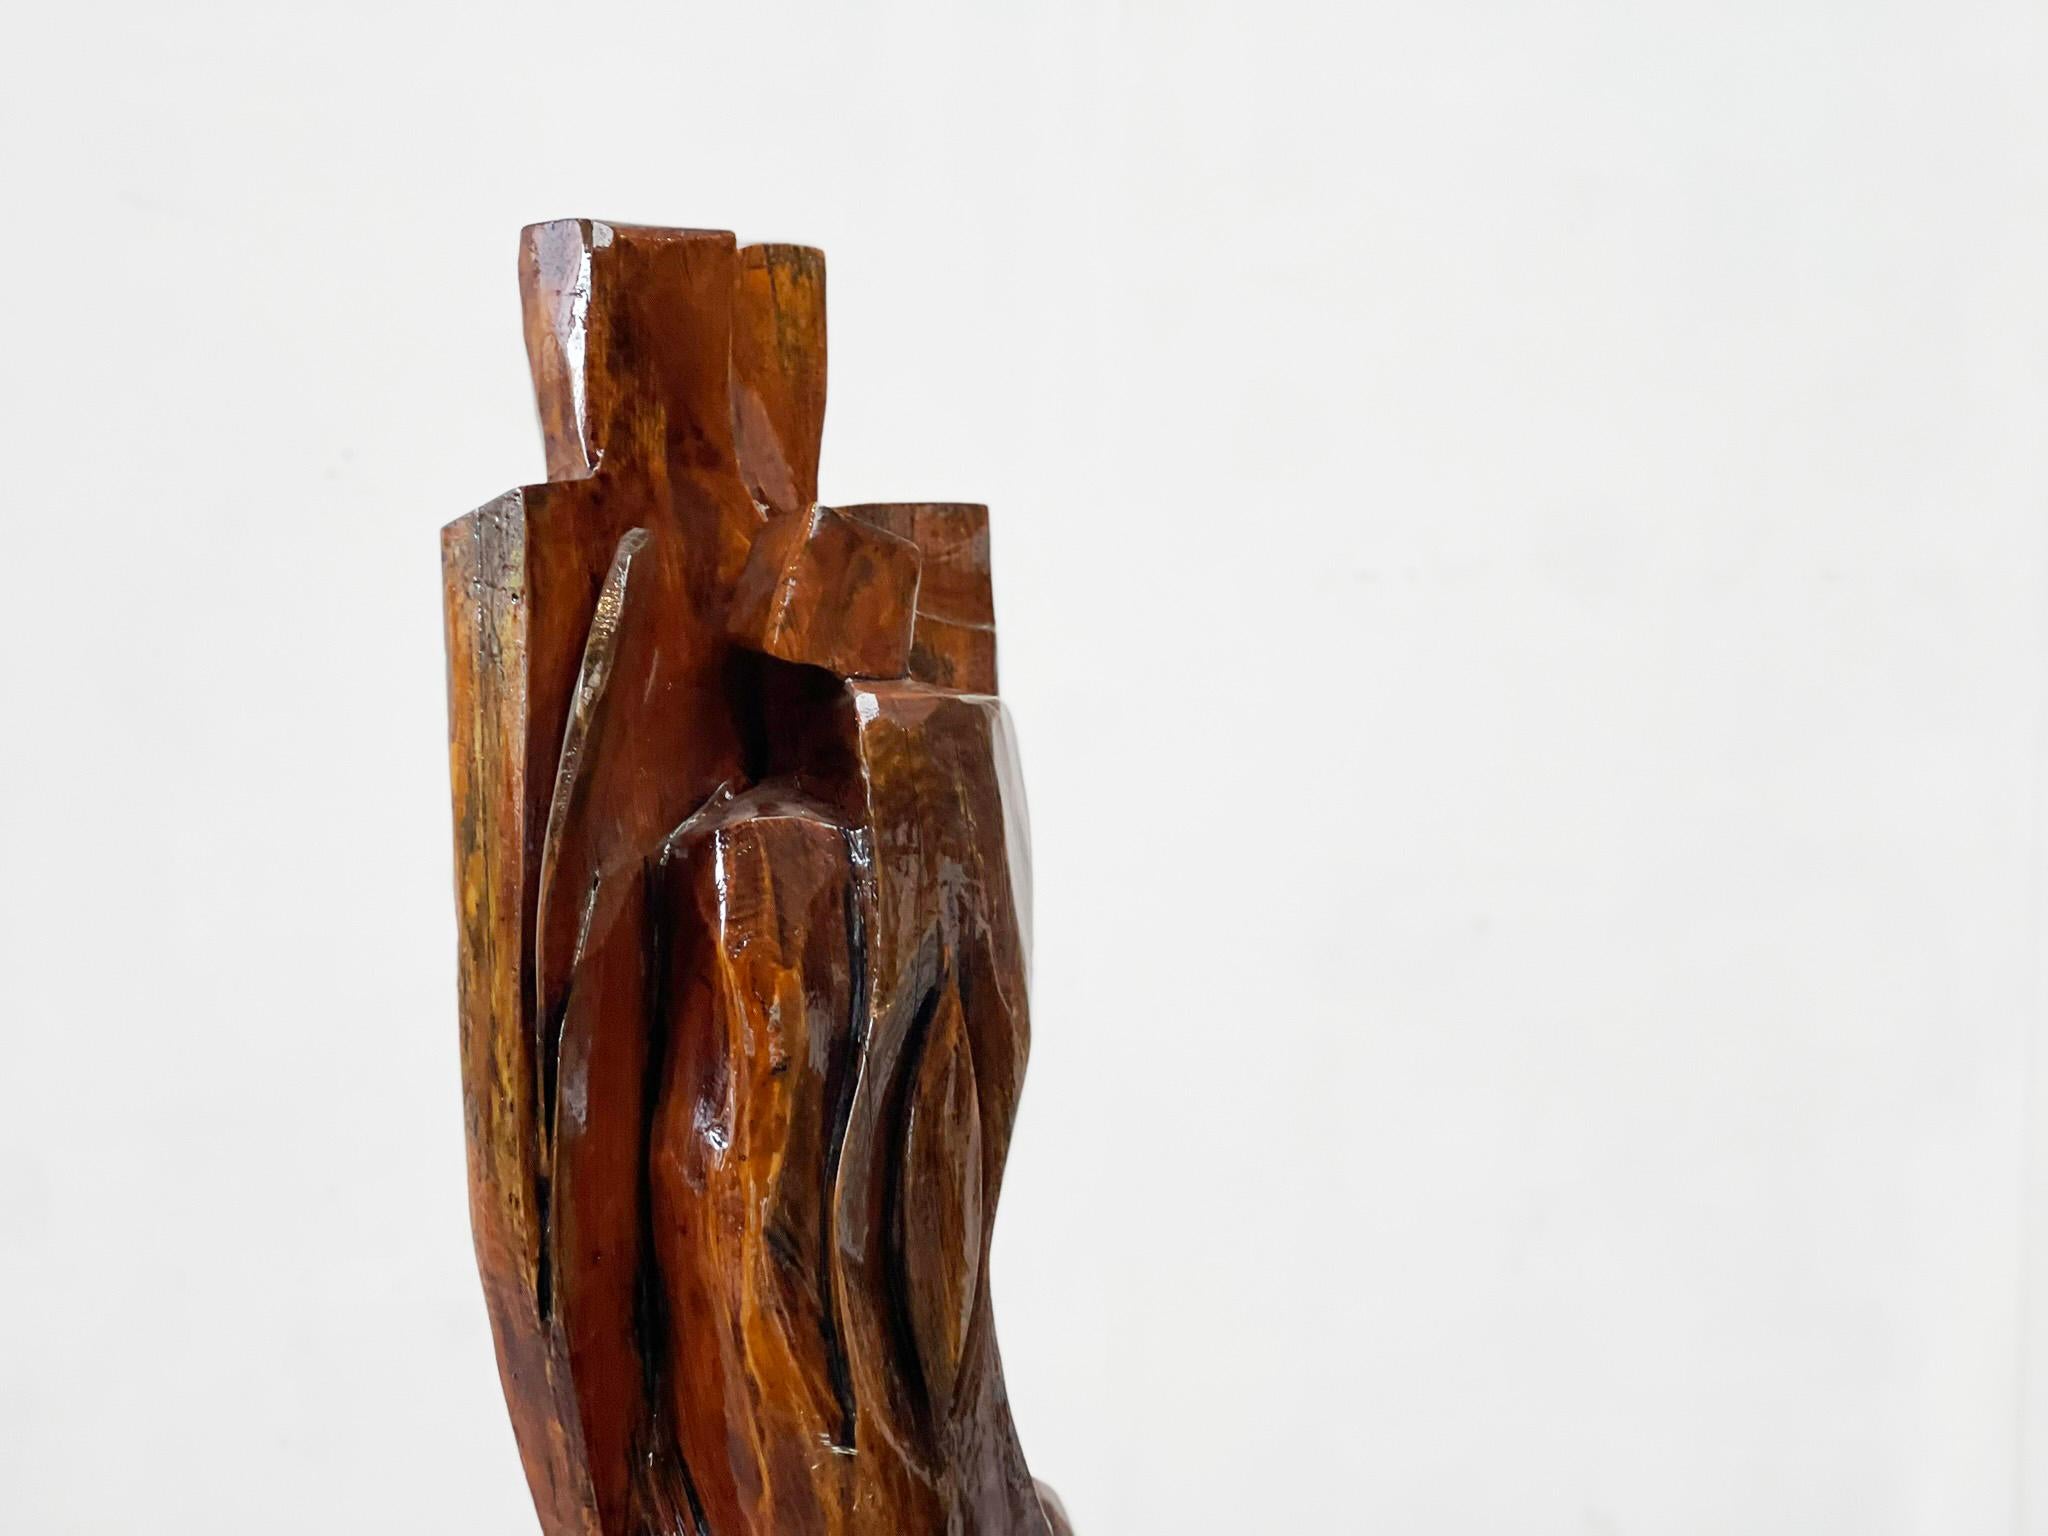 XL 170cm Belgian wooden sculpture
What a statement piece. This piece was created in the 70s by a belgian artist. it is a work of art made from 1 piece of wood and that of a whopping 170cm high. It is a mix of elegance and brutalism. The piece was